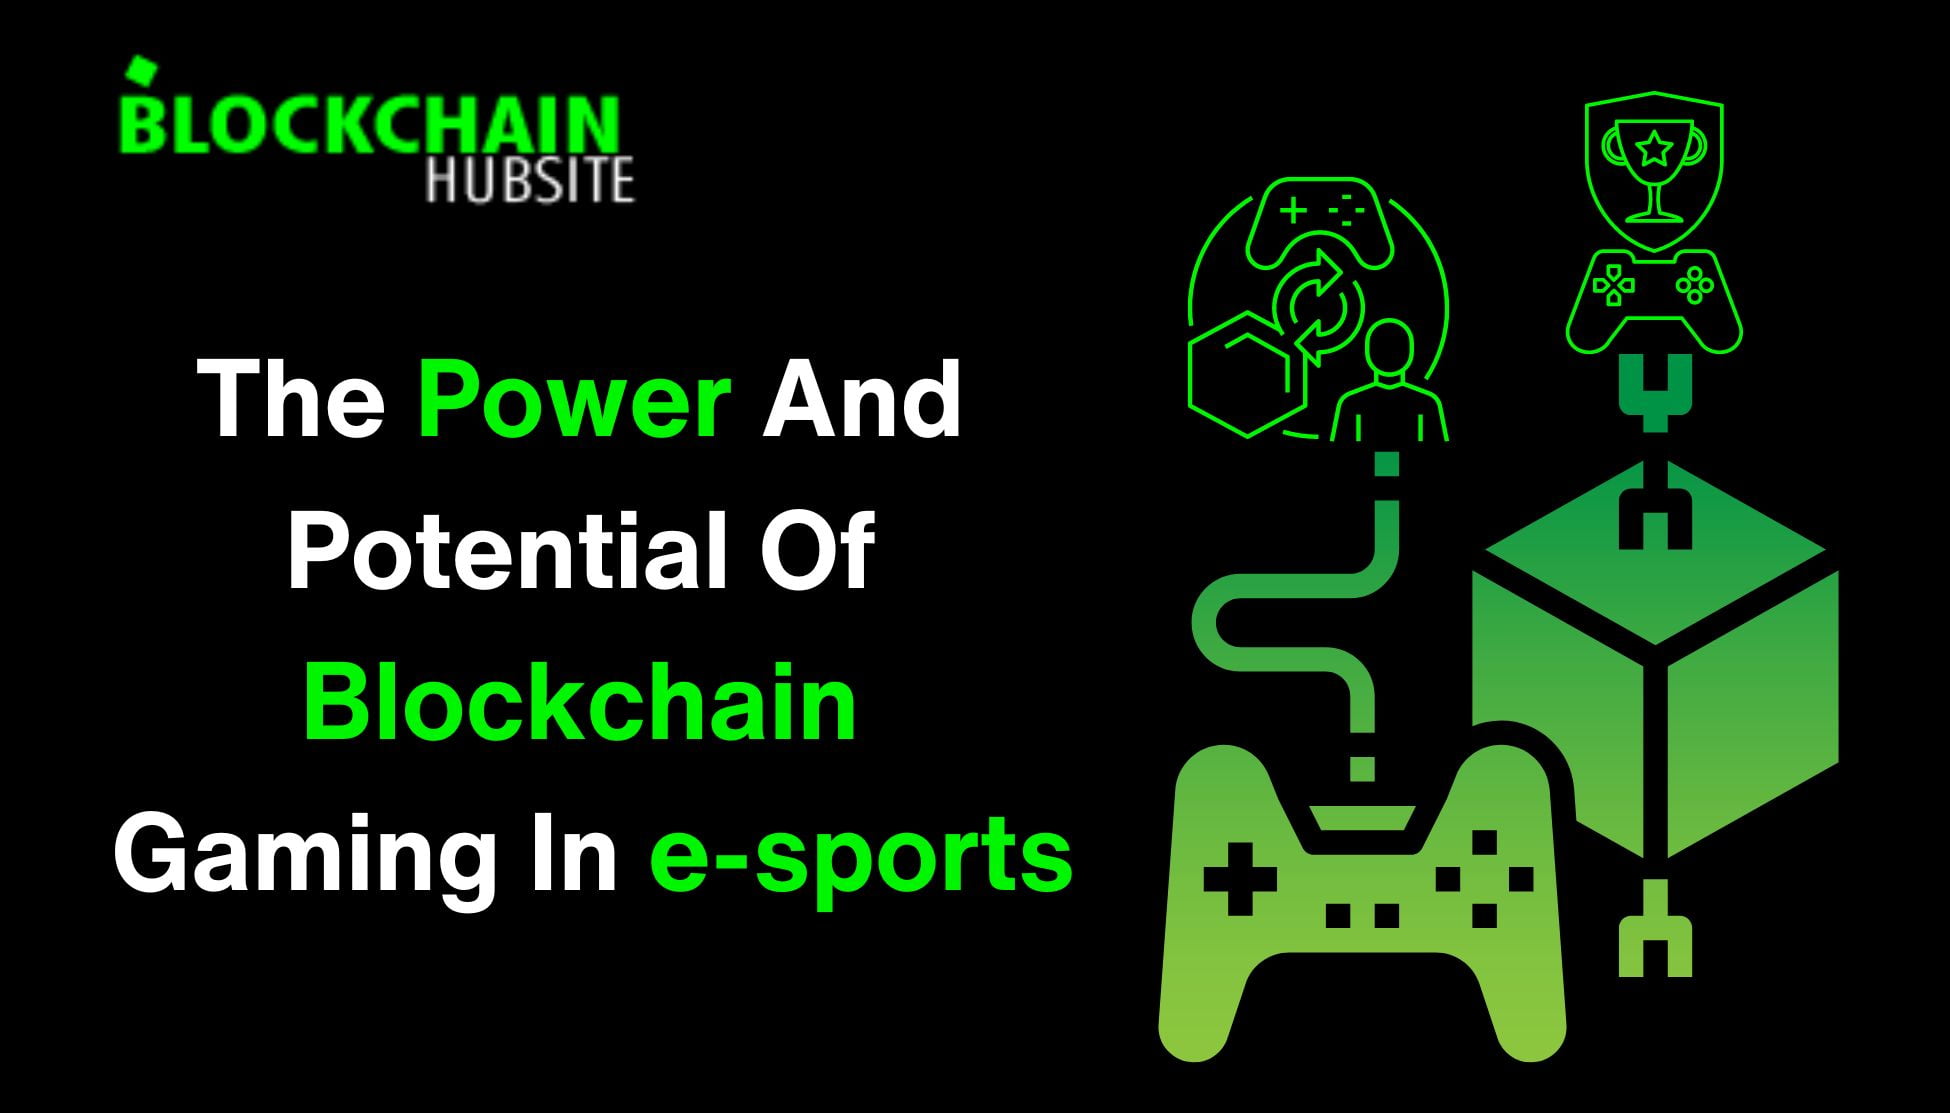 The Power And Potential Of Blockchain Gaming In e-sports